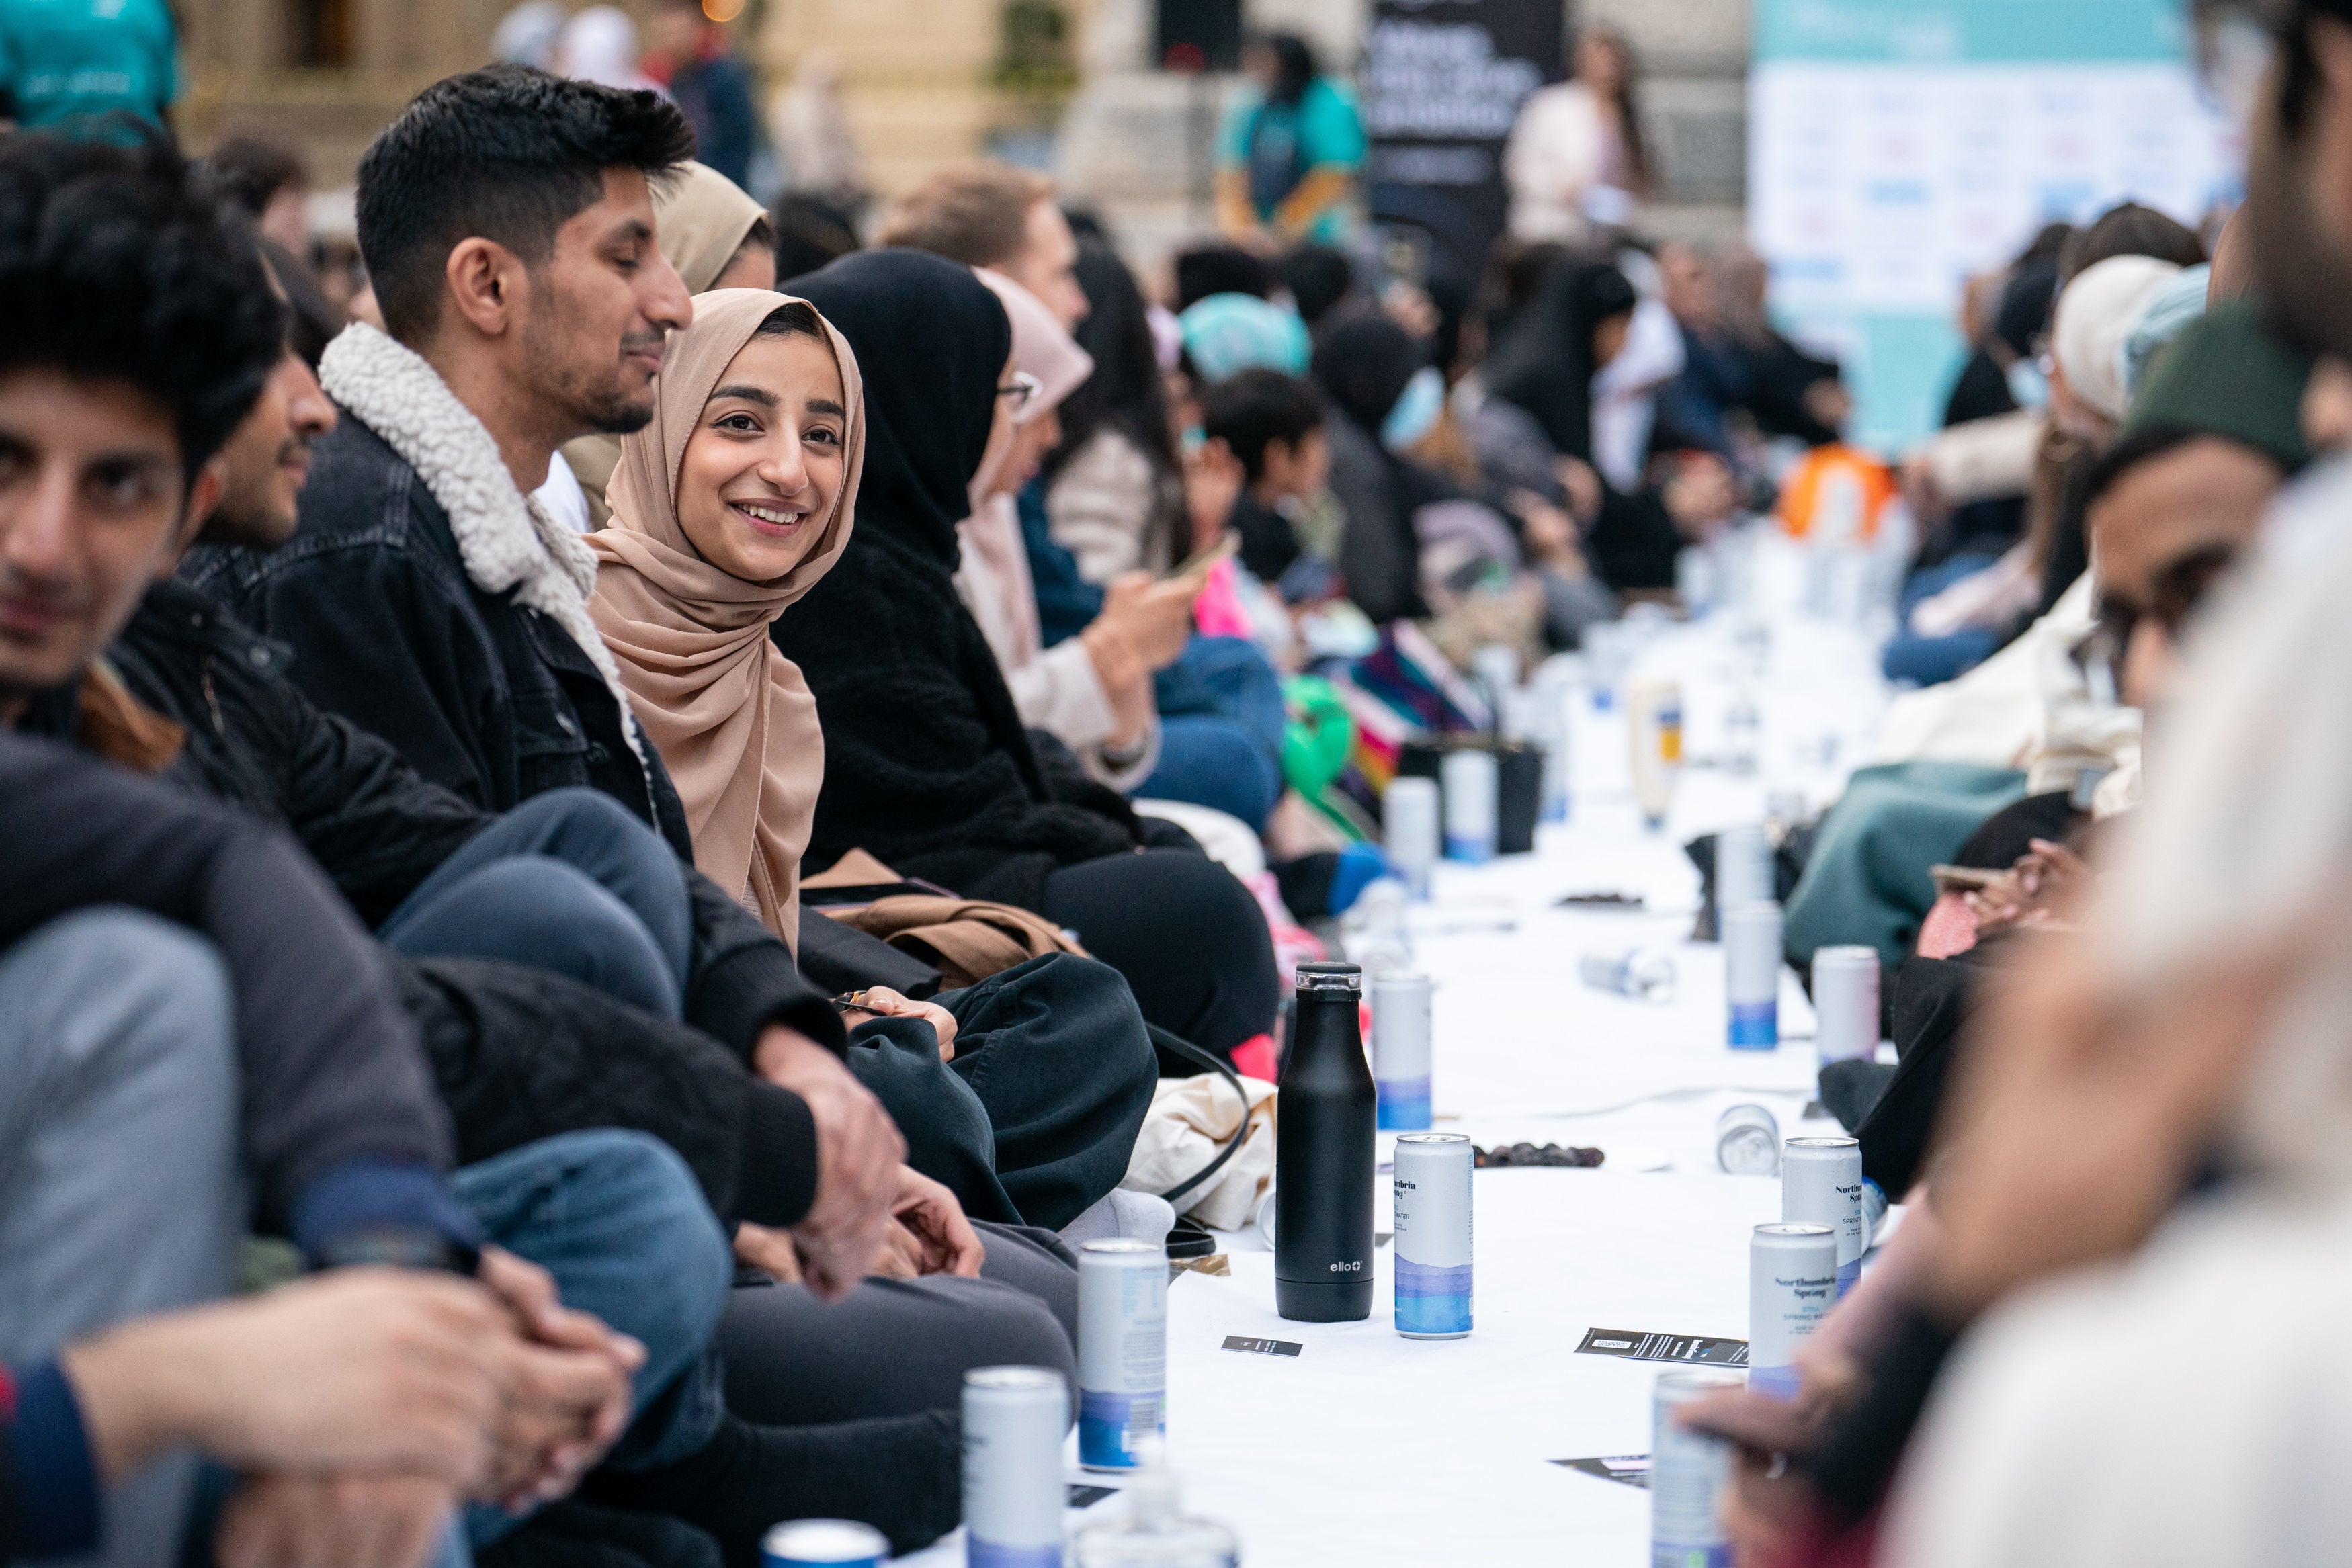 Muslims and non-Muslims can come together at Open Iftar to break fast and share experiences, says it’s founder